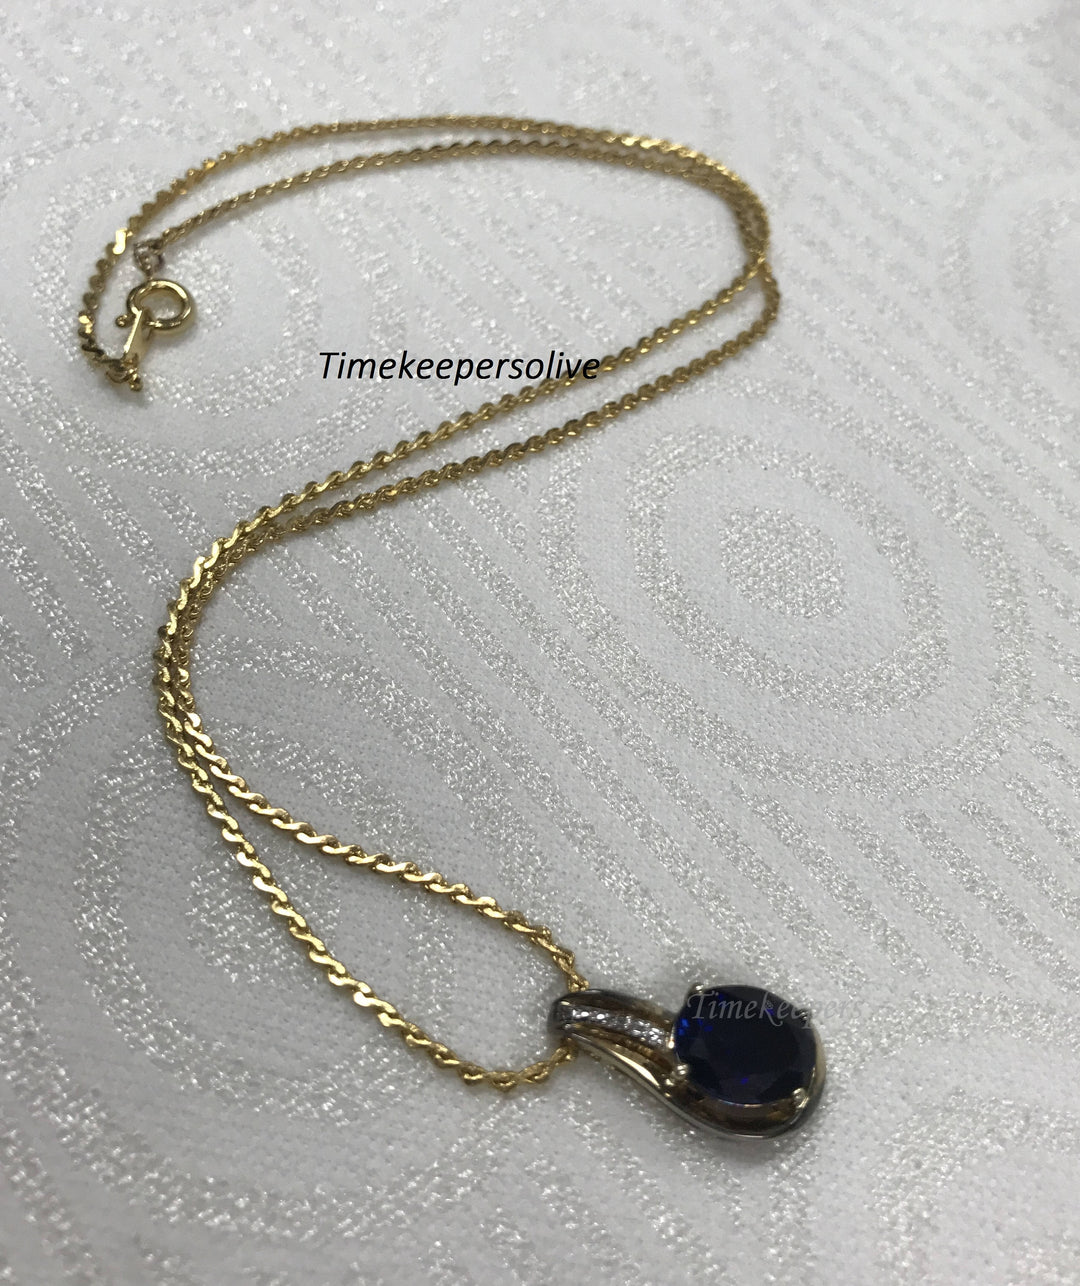 b120 Gorgeous Vintage Gold Filled Silver Blue Stone Pendant 18" Chain Necklace + Gift